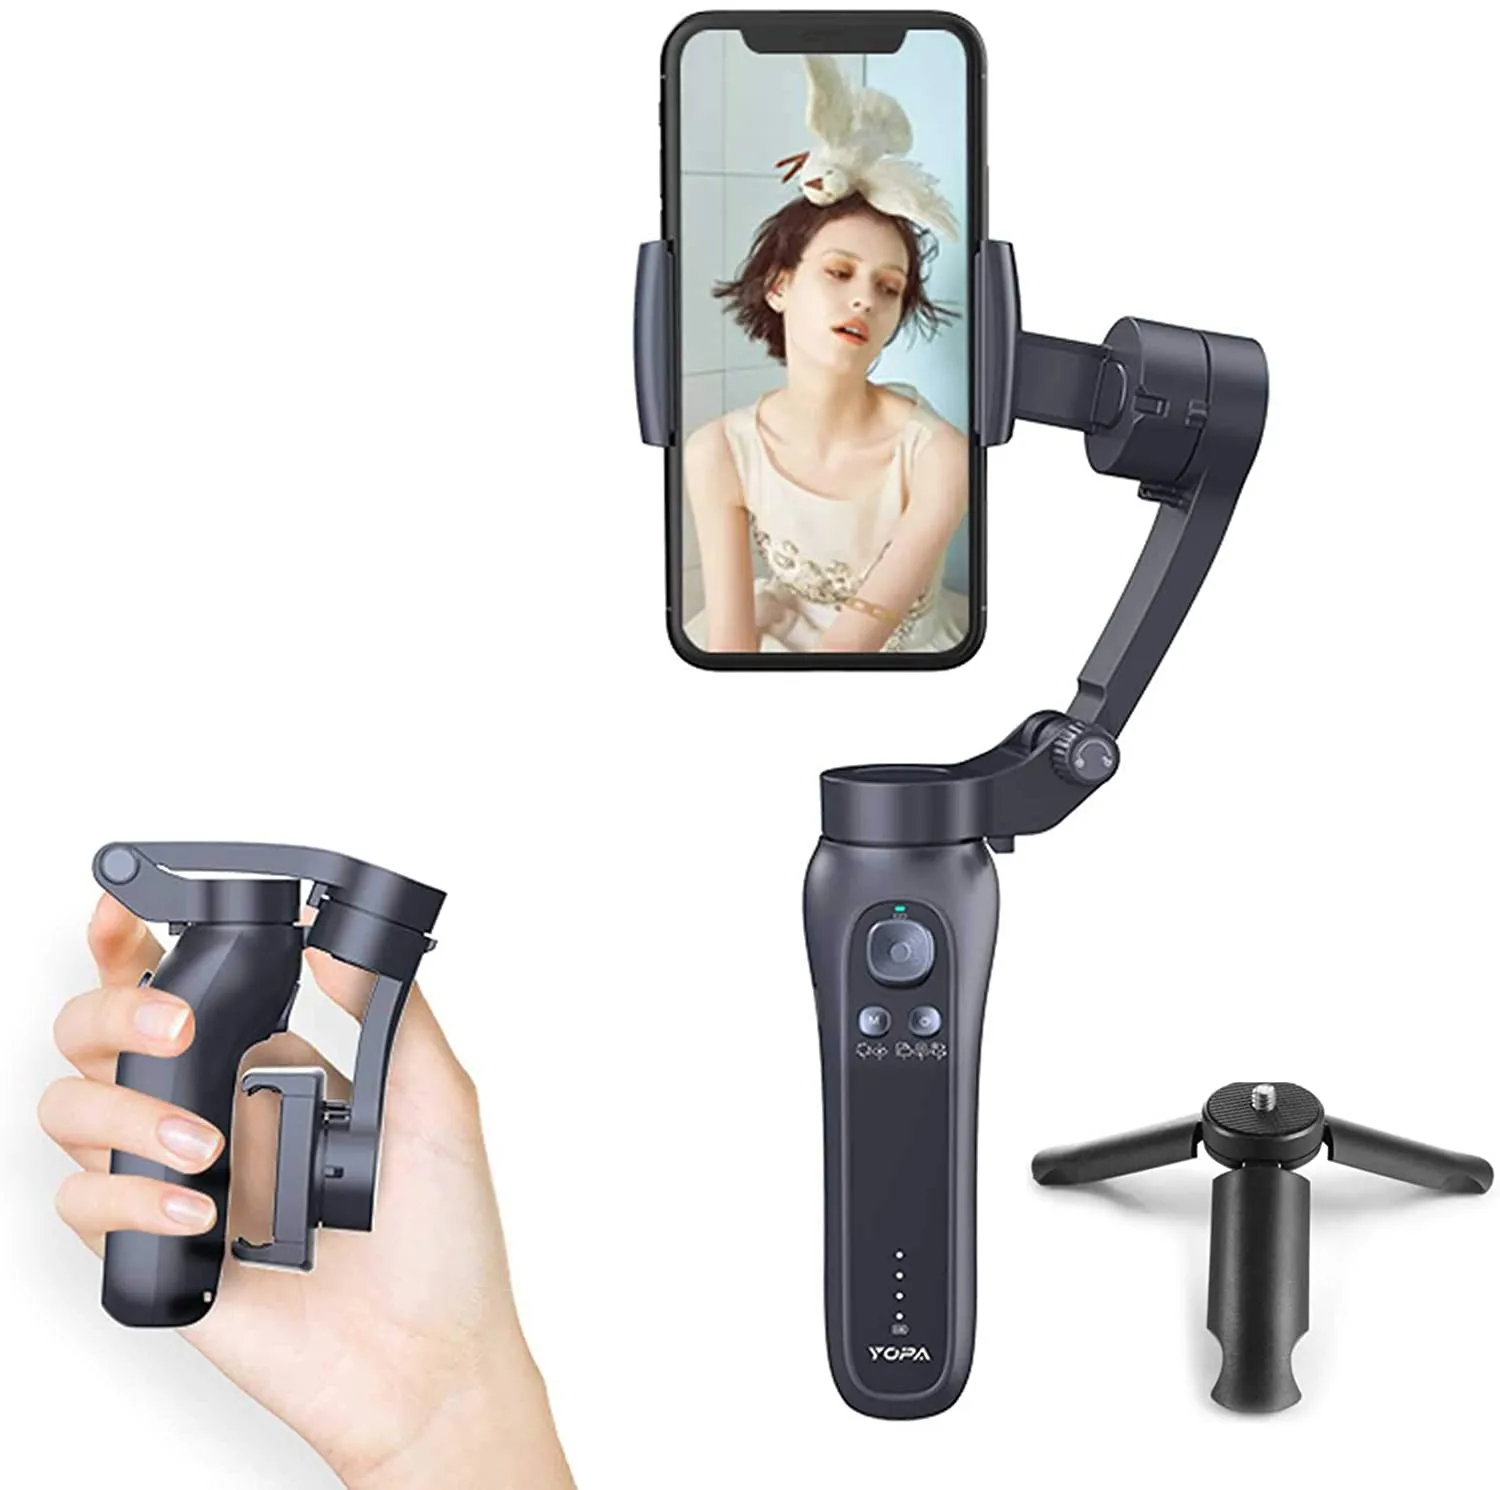 Стабилизатор EverGrow Foldable 3-axis Smartphones Gimbal Professional Video stabilizers for iPhone 11, 12 (GIMBAL-L7B-8)#1